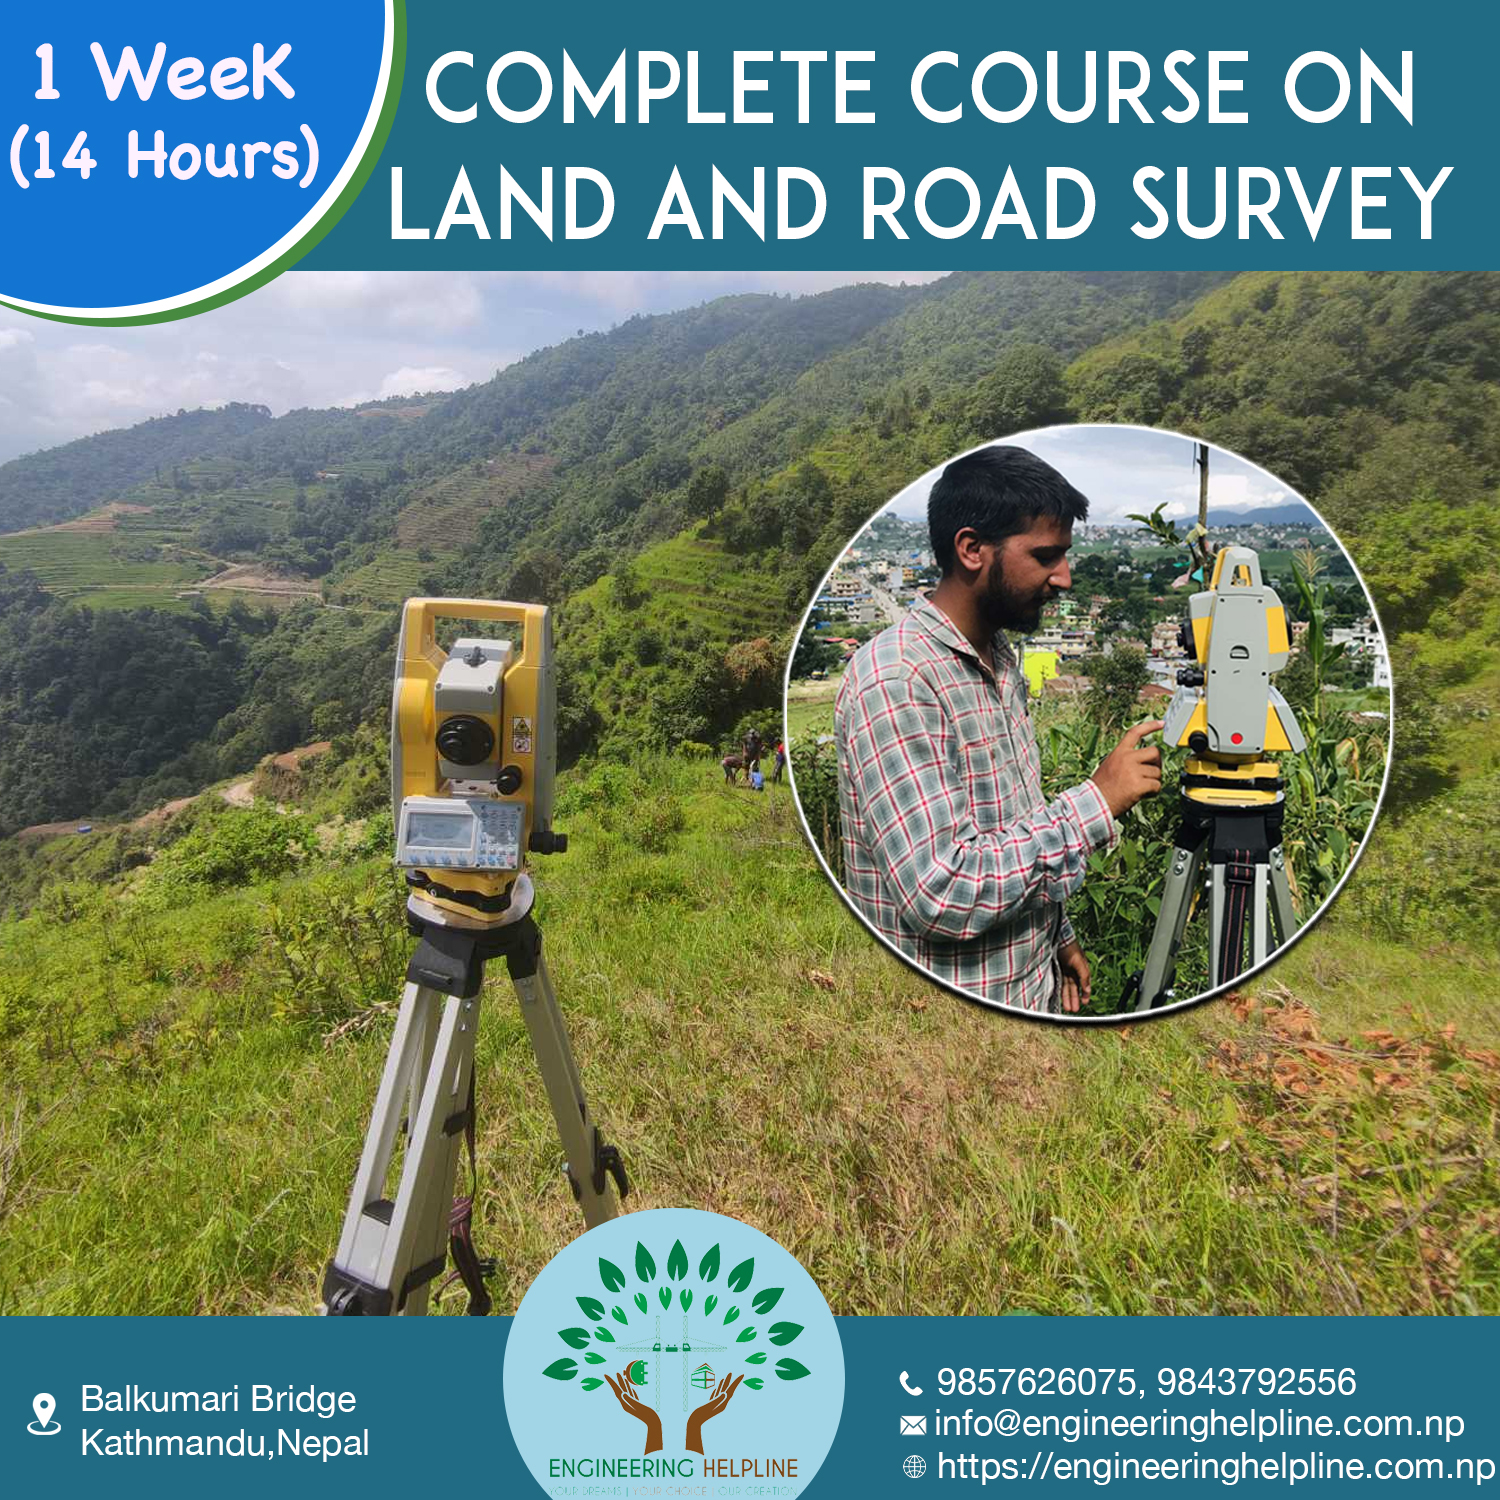 Complete Course on Land and Road Survey